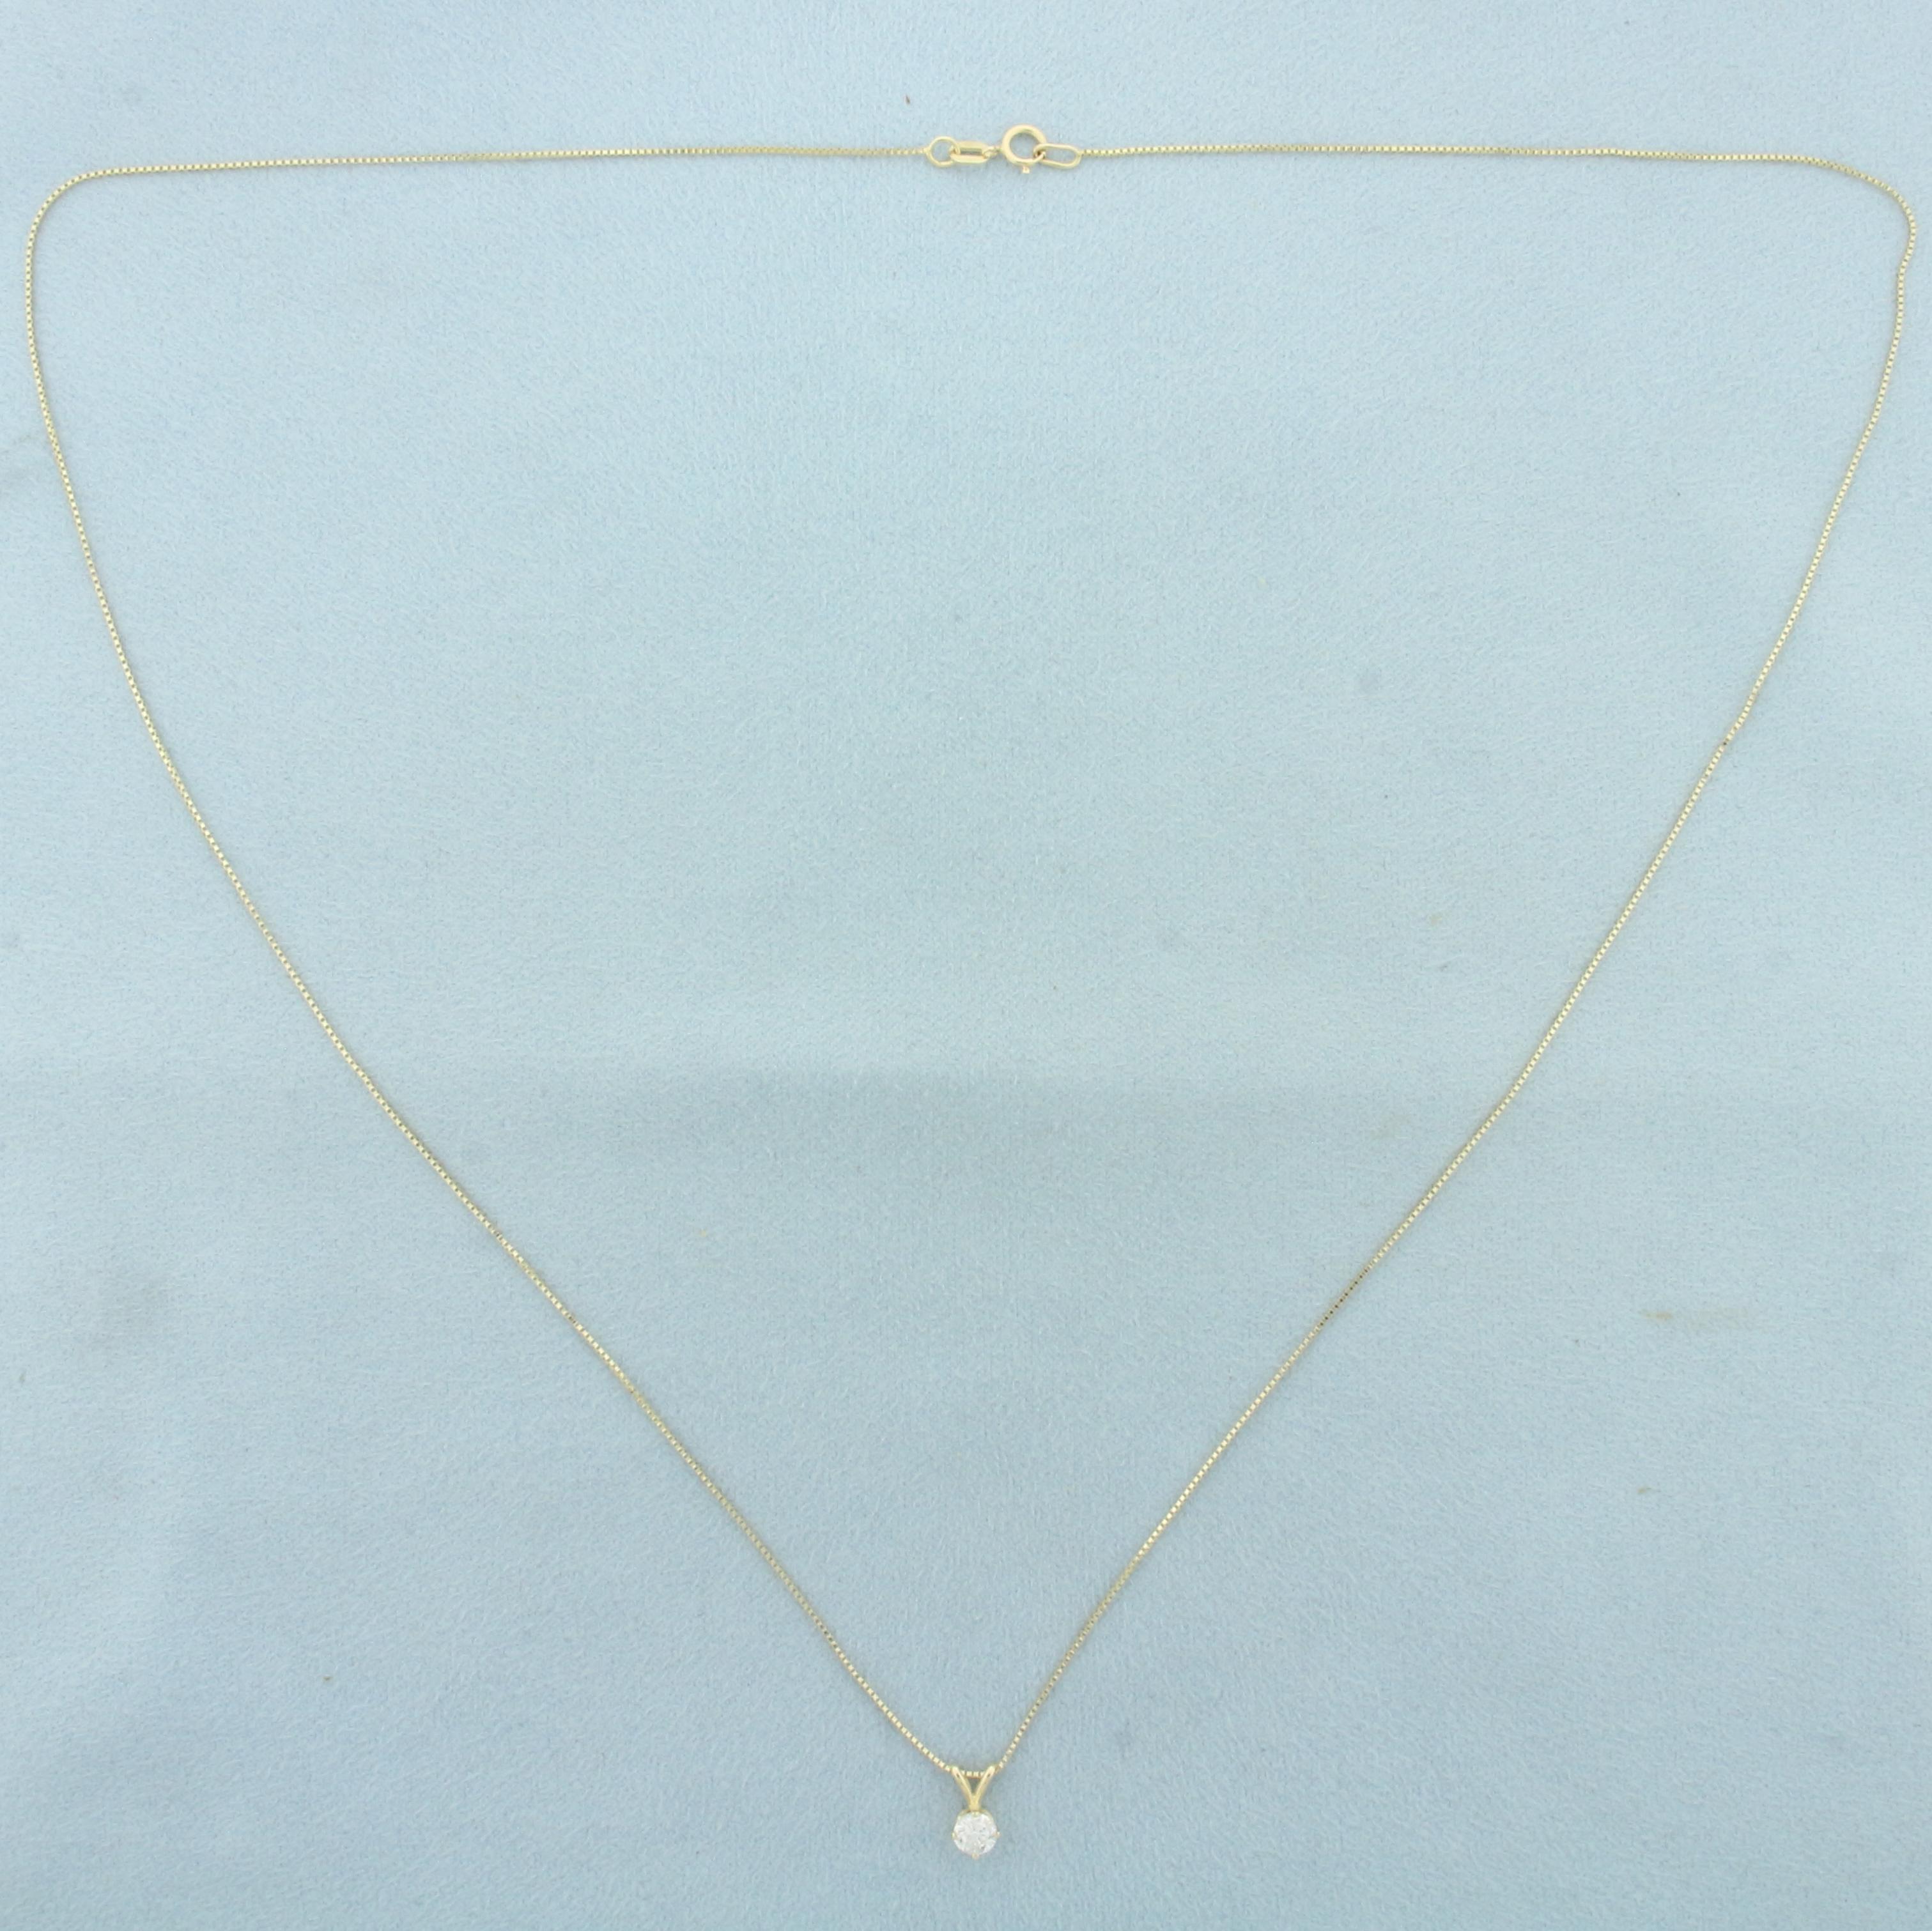 Diamond Solitaire Necklace In 14k Yellow Gold